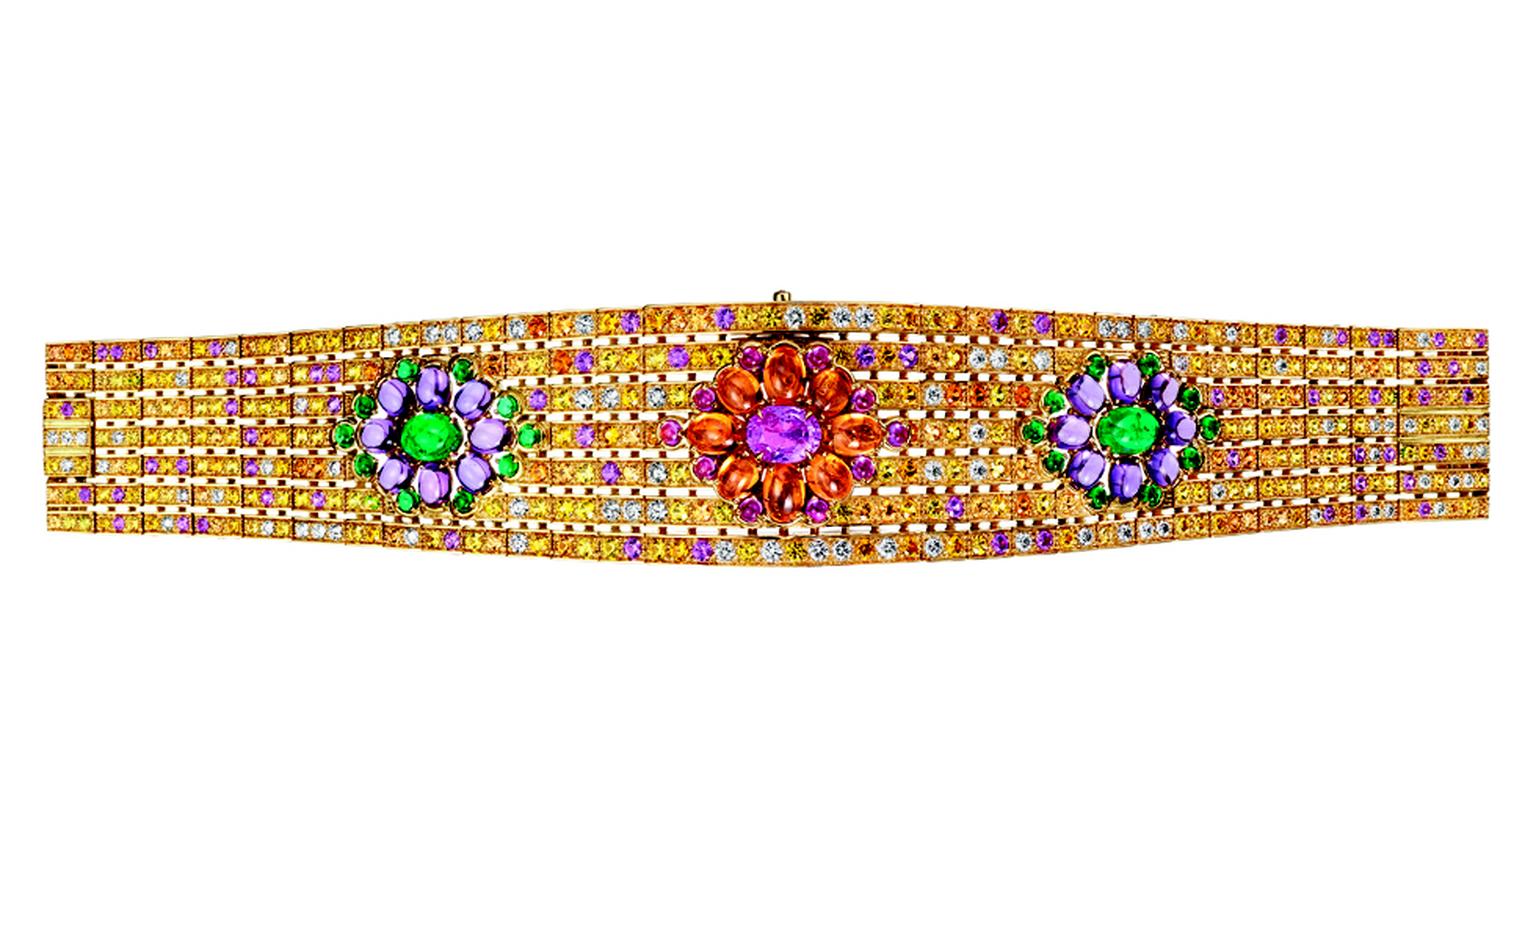 BOUCHERON. Isola Bella watch bracelet, set with a pink oval sapphire and pink and orange cabochon sapphirs, paved with yellow, pink and orange sapphires, emeralds and diamonds, on yellow gold. A watch is hidden under the central pattern. POA